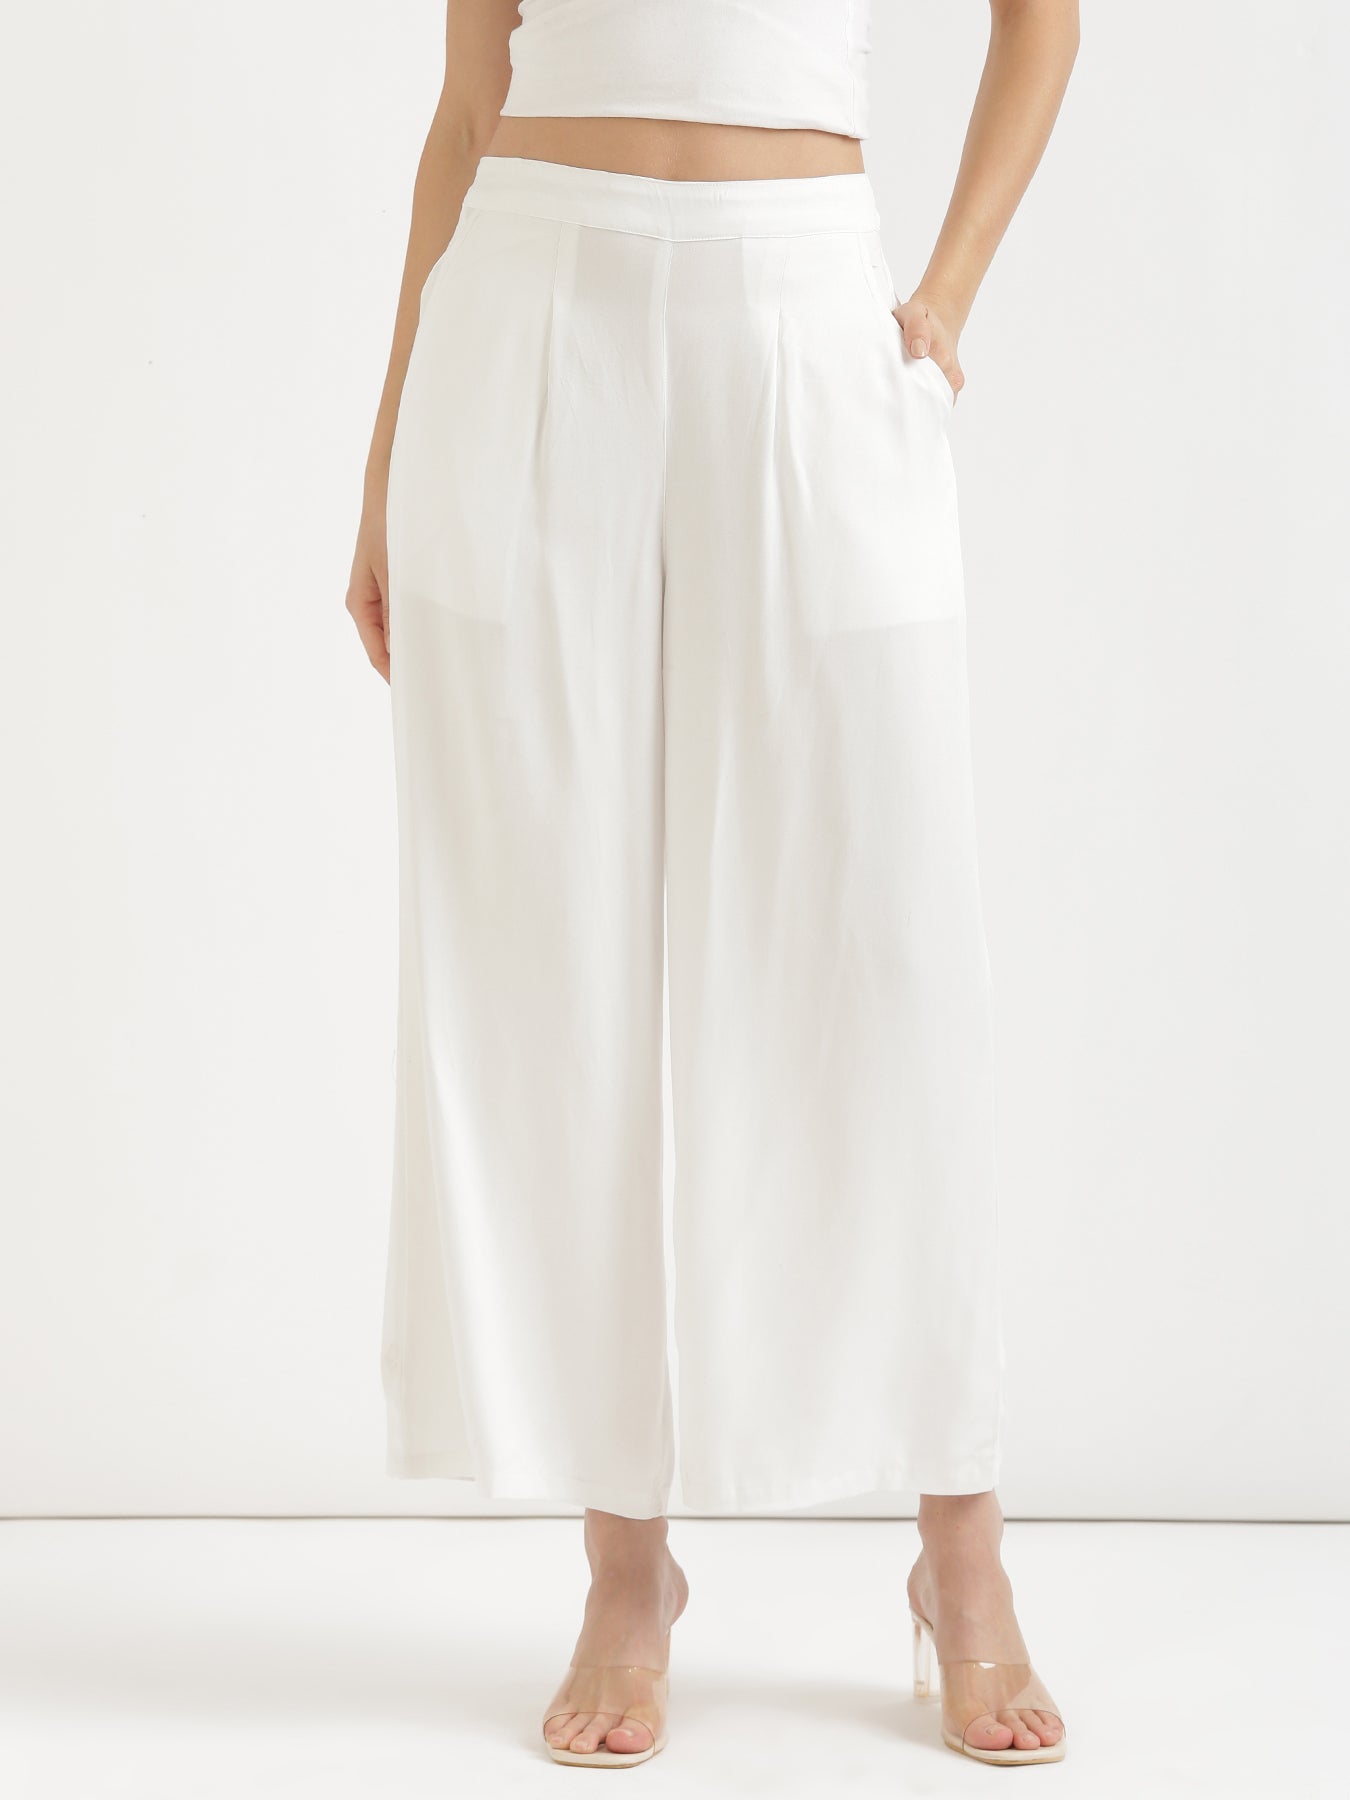 White Palazzo Pants For Women  Shop online from सादा /SAADAA